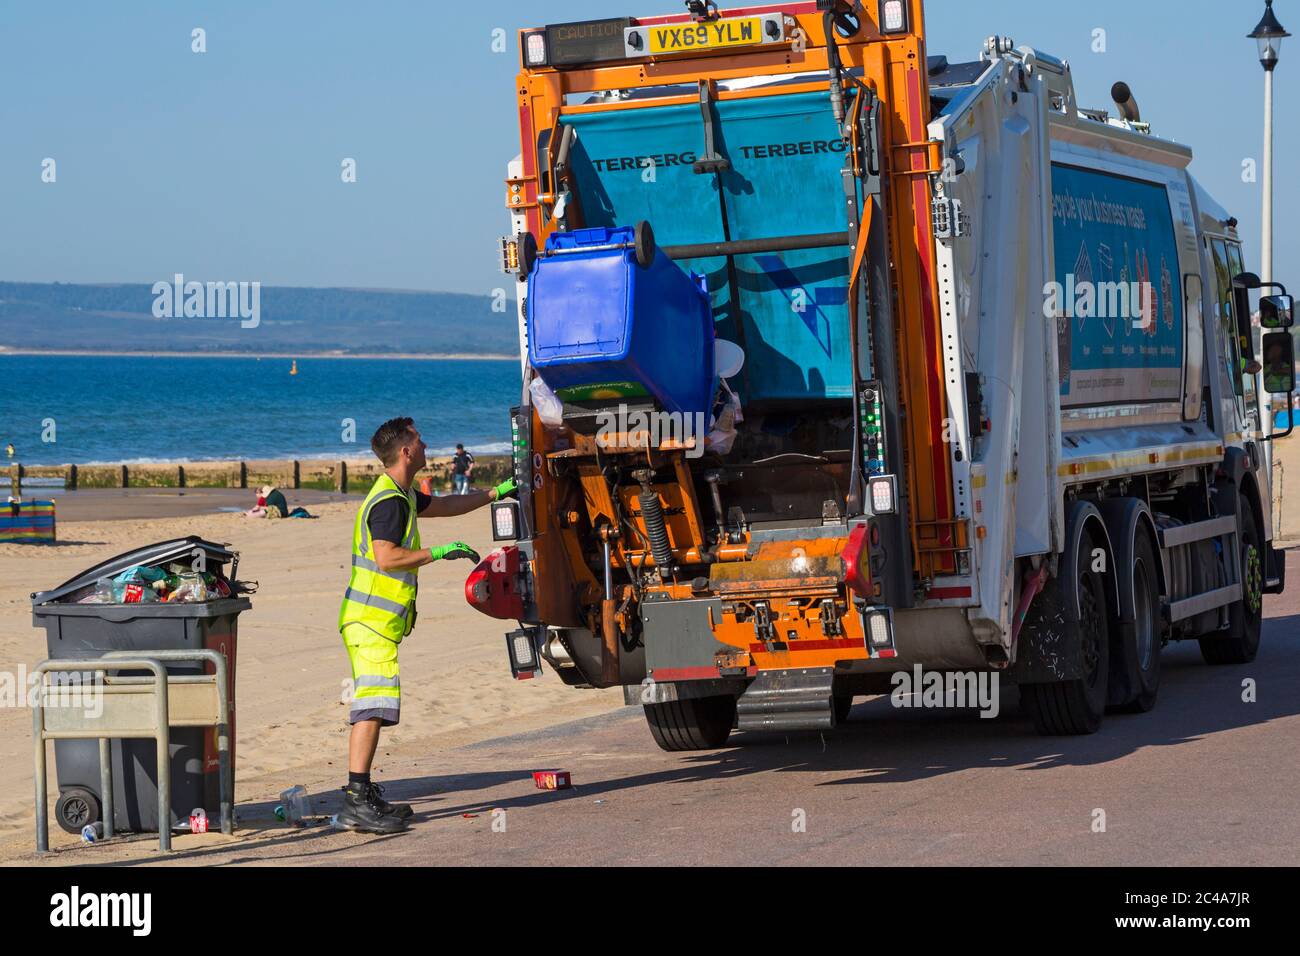 Rubbish left behind and being collected on the hottest day of the year during heatwave at Bournemouth beach, Dorset UK in June - litter garbage Stock Photo